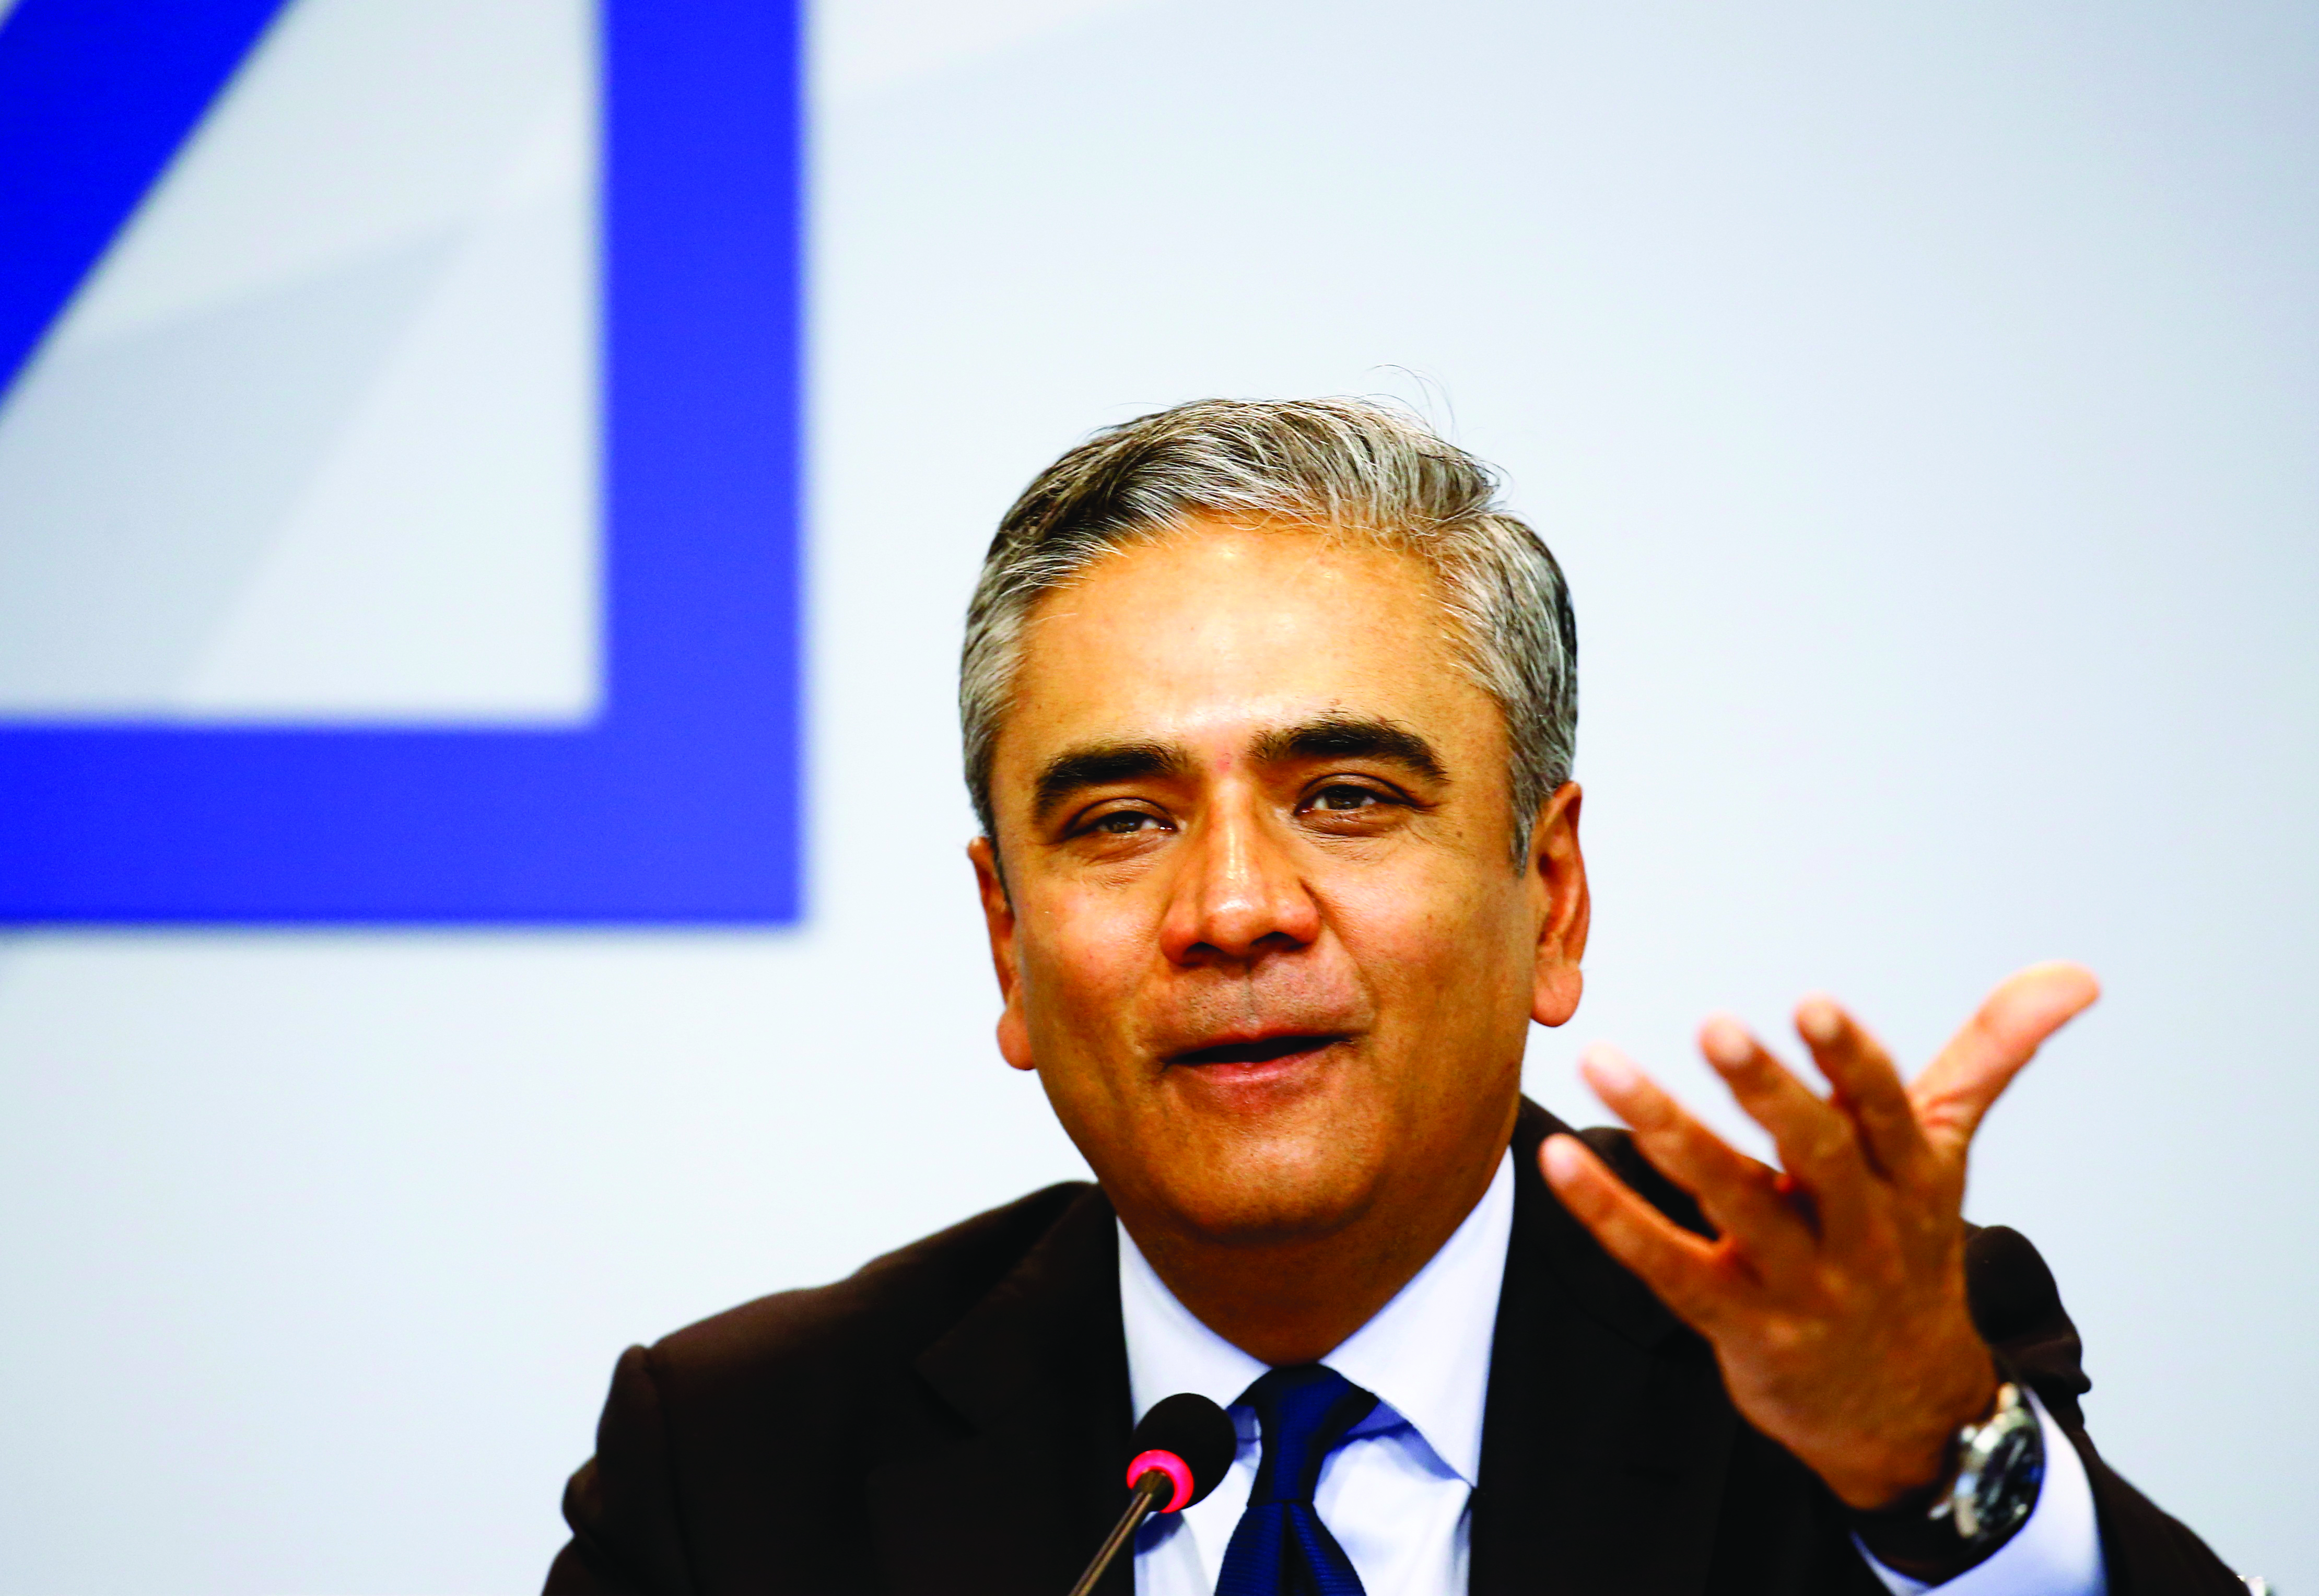 Anshu Jain, co-CEO of Deutsche Bank, gestures at a news conference in Frankfurt, Germany, April 27, 2015. Deutsche Bank will cut 200 billion euros ($217.5 billion) in investment bank assets and exit a tenth of the countries in which it operates as part of a restructuring program designed to boost earnings and cut risk. REUTERS/Kai Pfaffenbach - RTX1AFMH